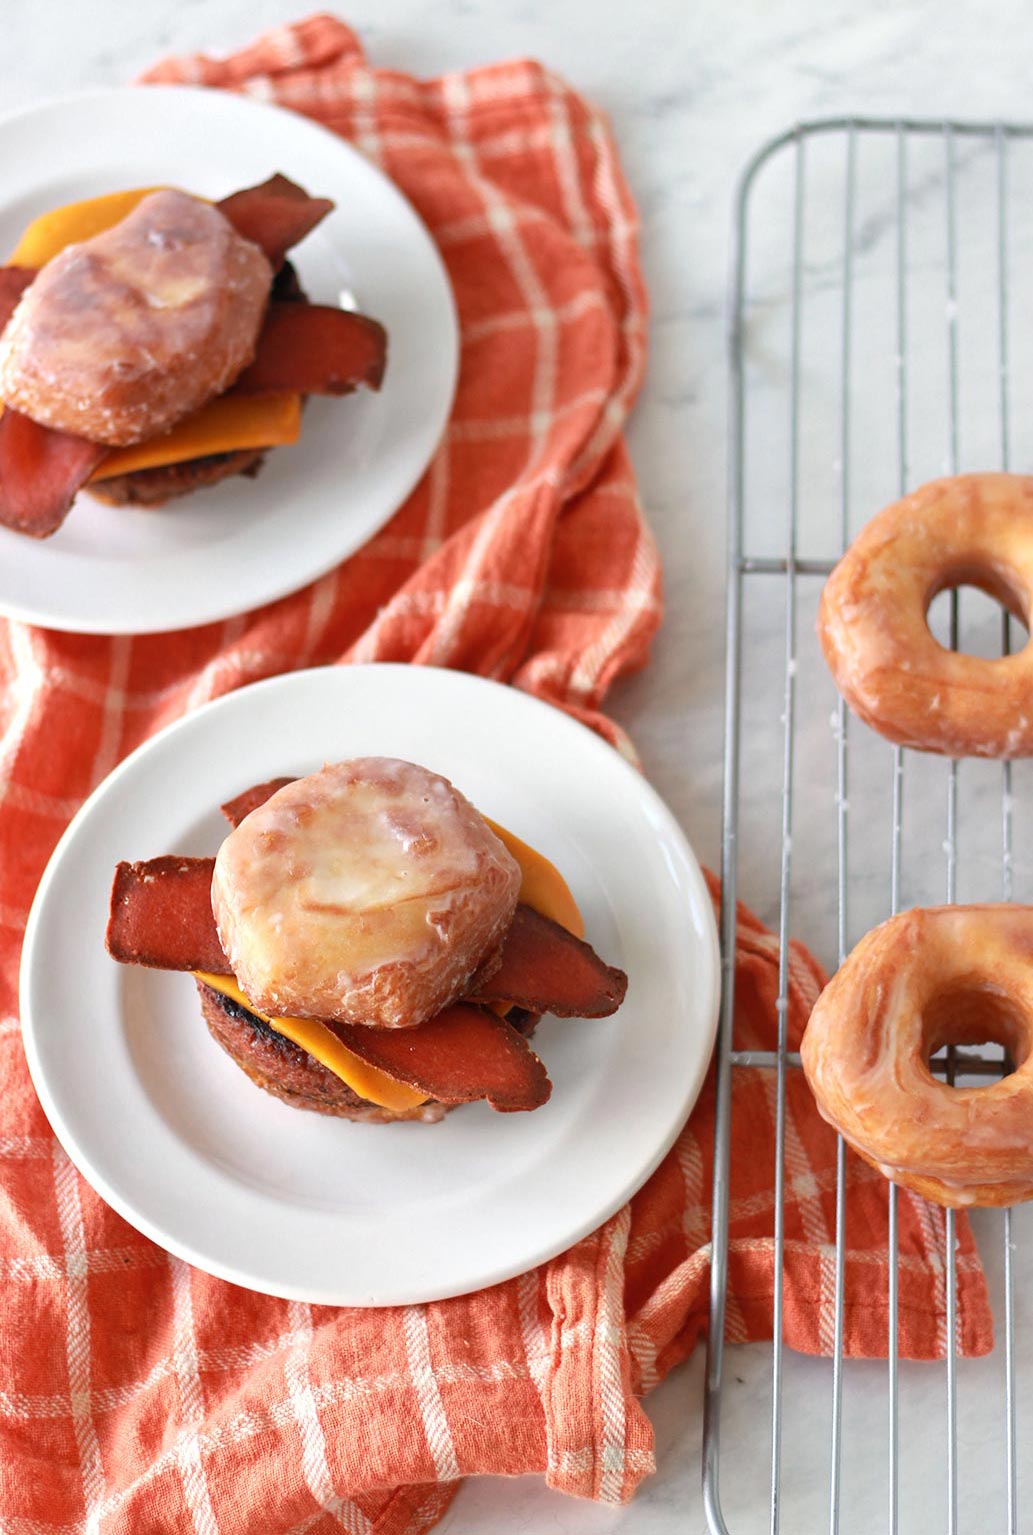 This vegan bacon cheeseburger is sandwiched between two glazed donuts as buns! Also known as the Luther Burger, this innovative plant based burger recipe comes with an easy vegan donut hack.